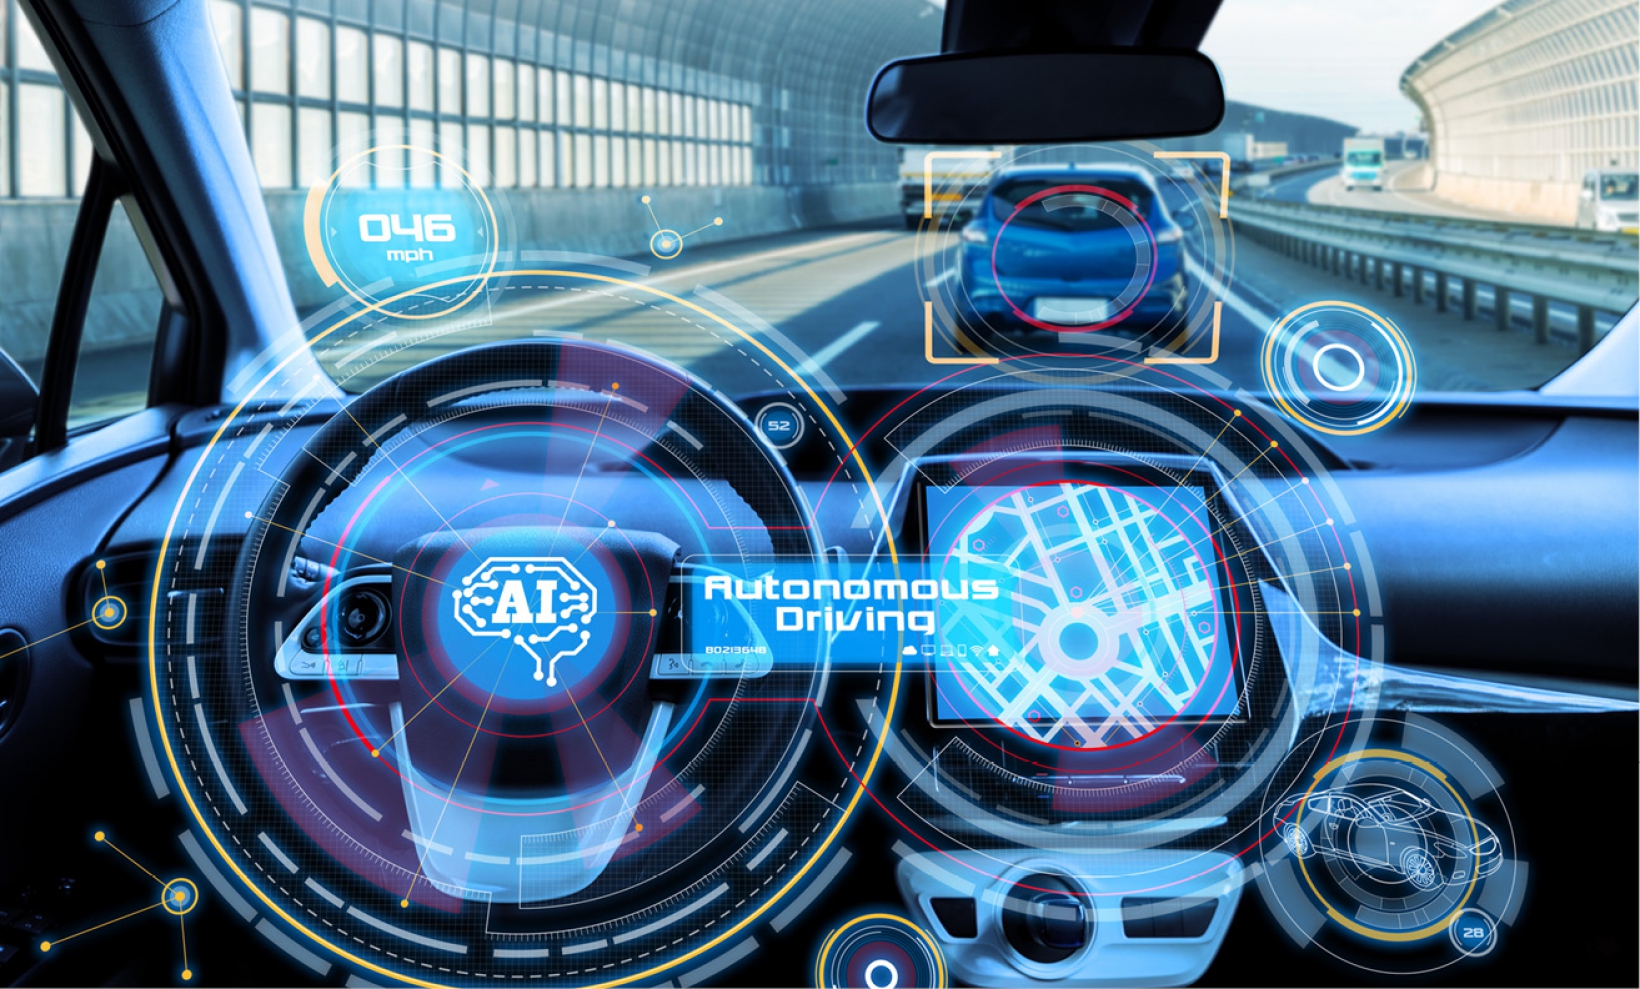 New Solutions For IoT And Automotive Applications From Arm